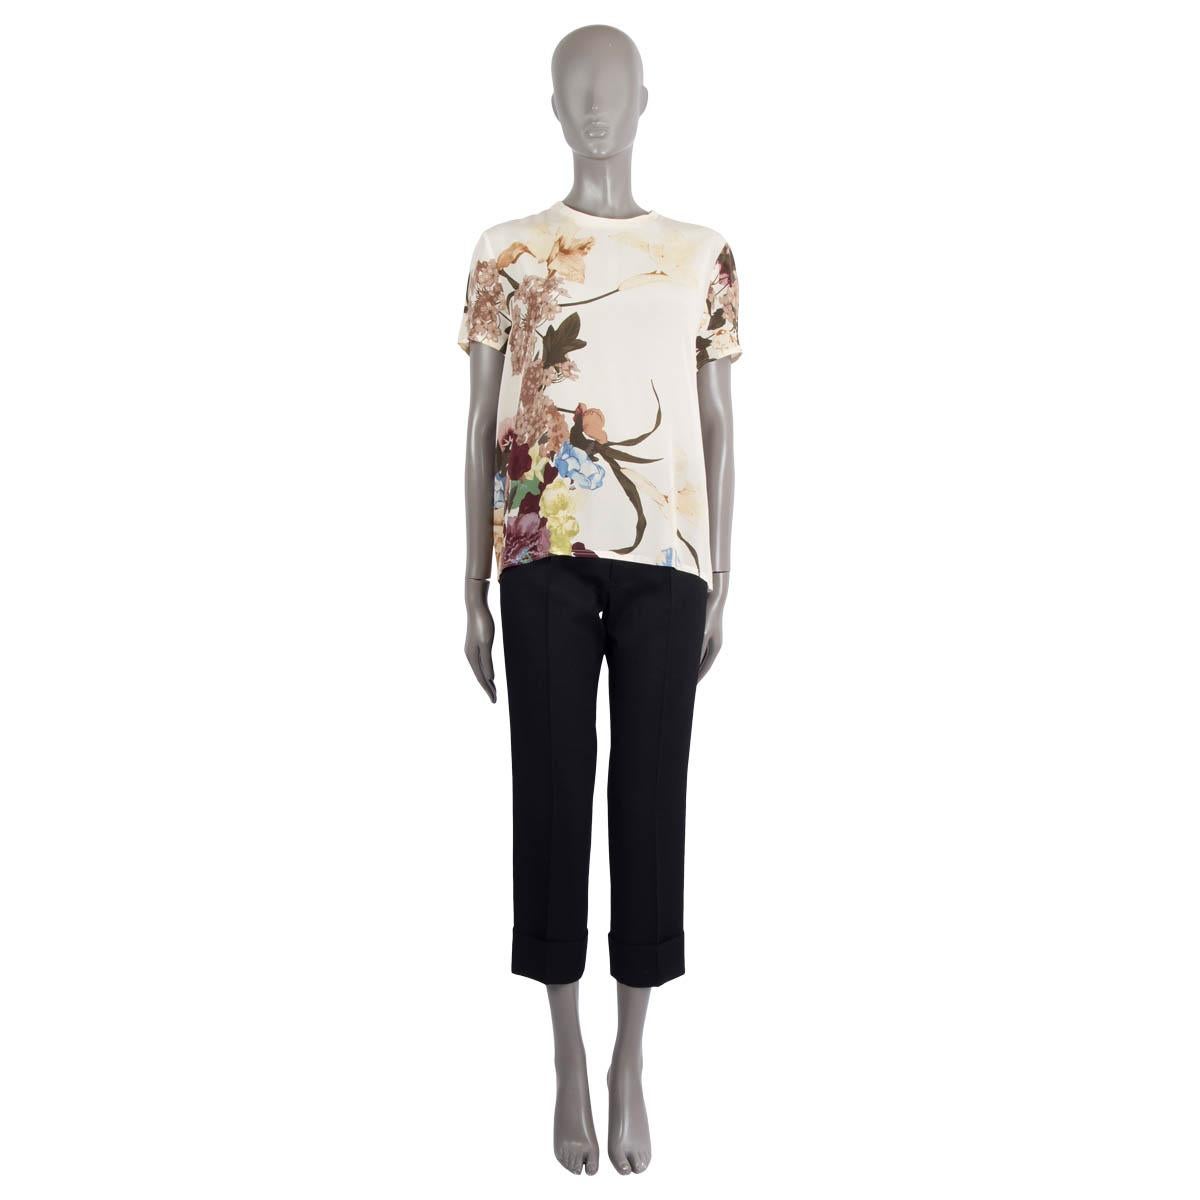 100% authentic Valentino short sleeve blouse in beige crepe de chin silk (100%) with Kimono 1997-print in brown and multicolor. Features a round neck and a buttoned key-hole in the back. Has been worn and is in excellent condition.

2016